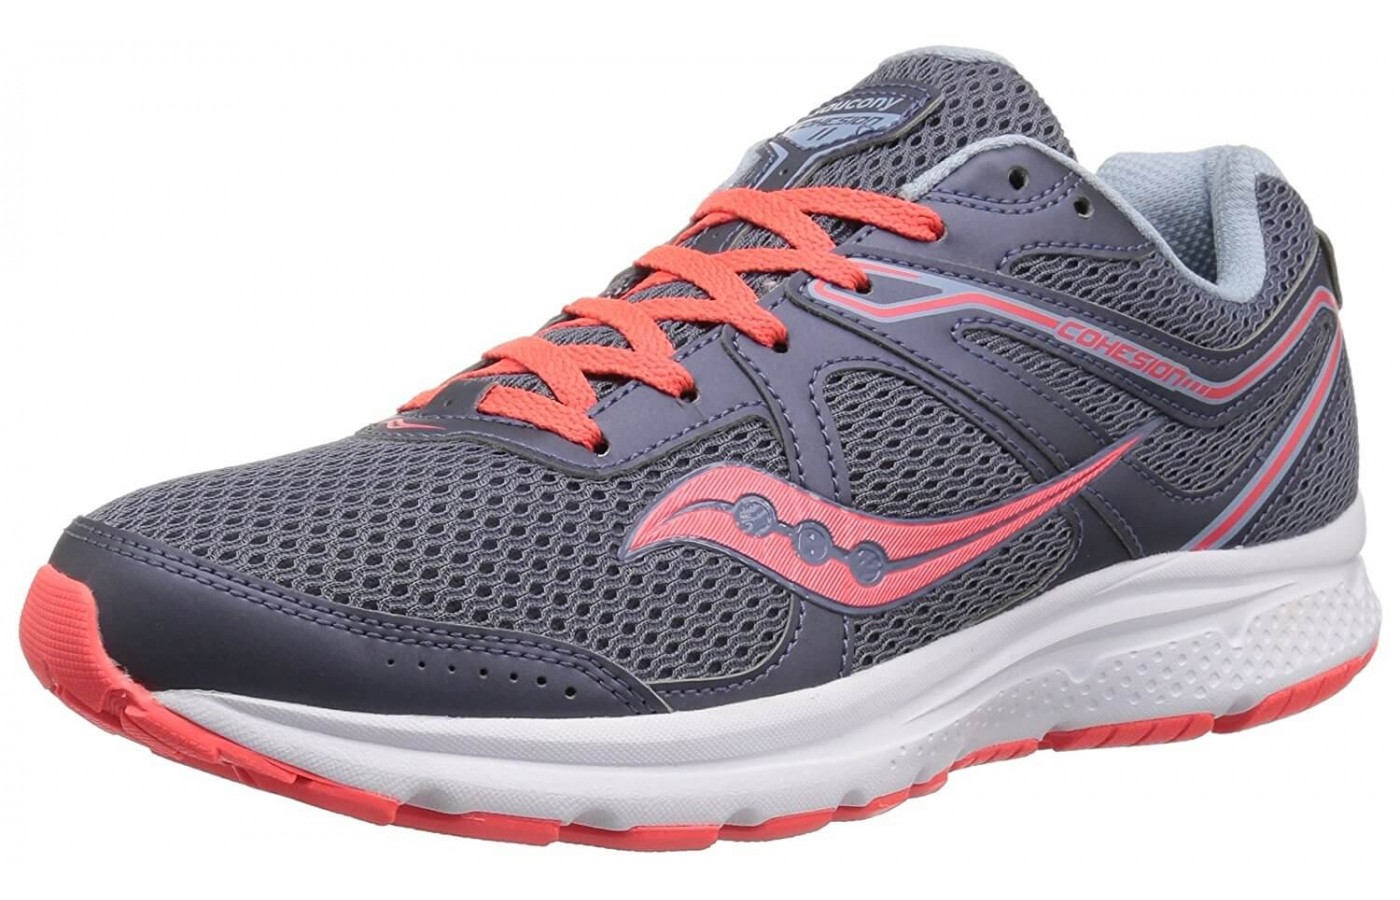 The Saucony Cohesion 11 features a REACT2U footbed